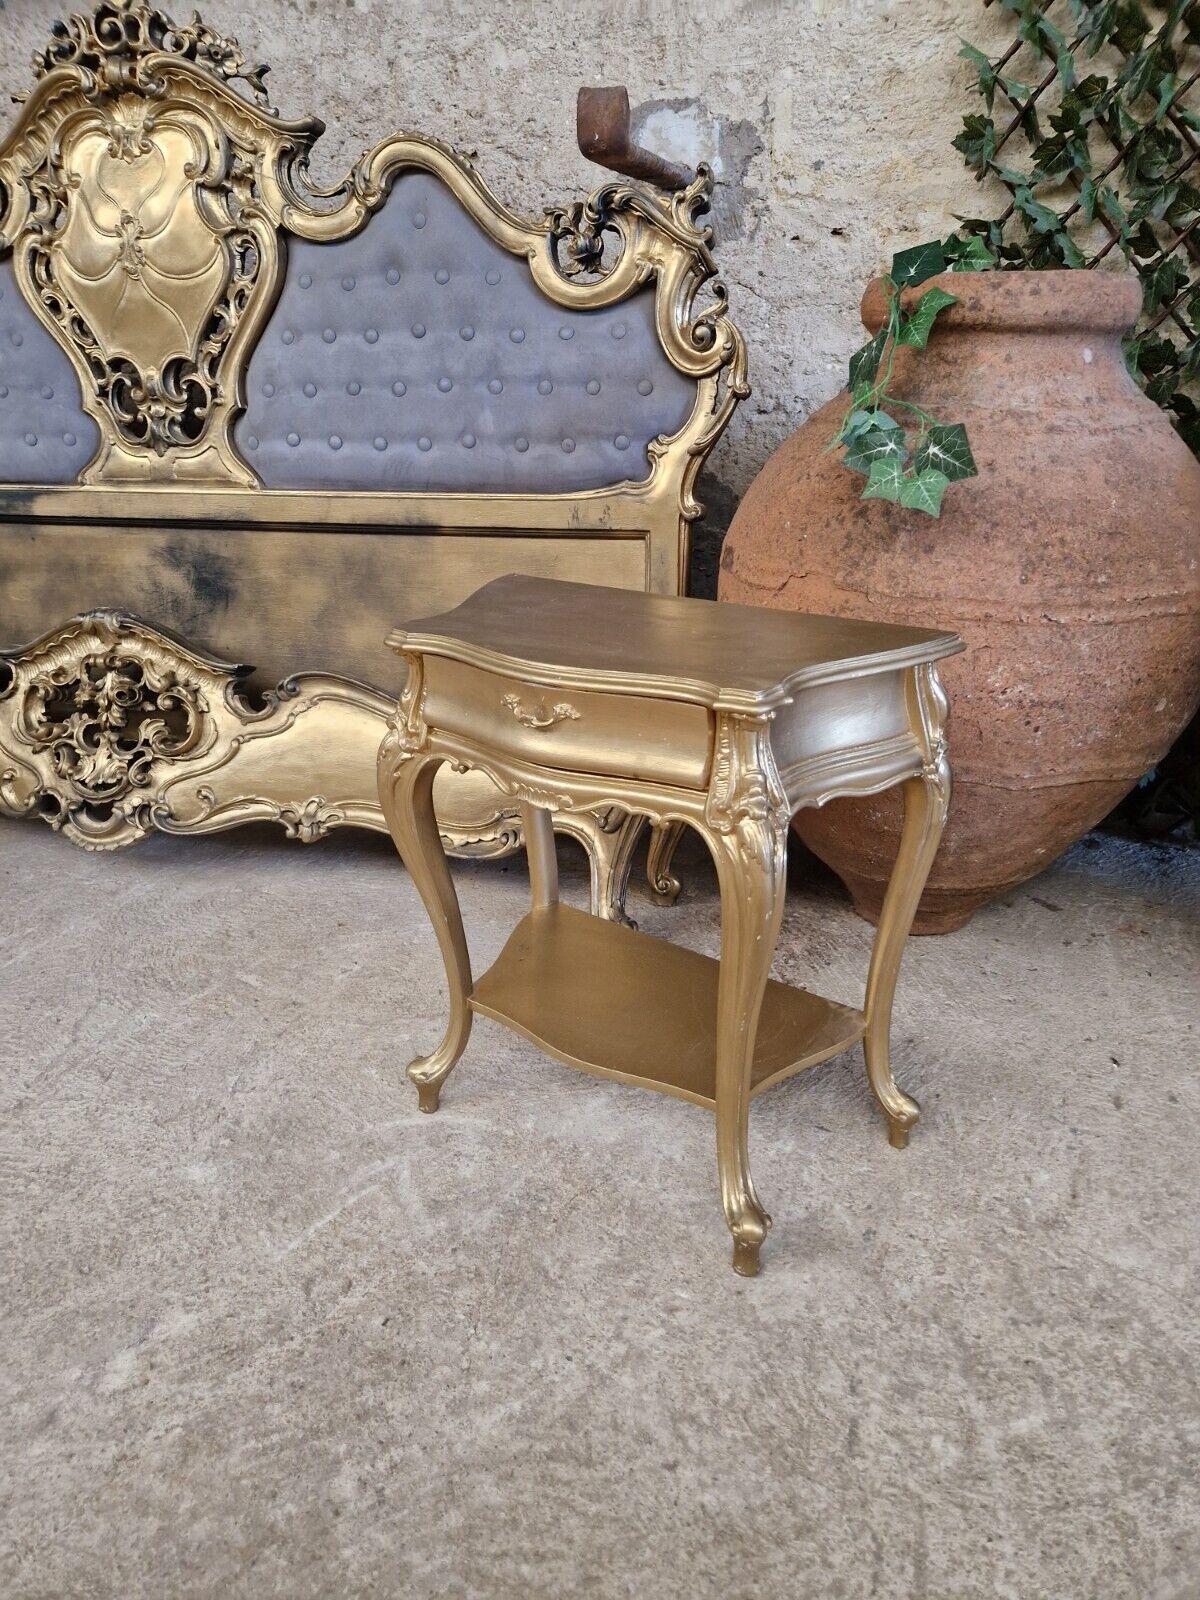 We are delighted to offer for sale this Super King Size Venetian bed and Side Tables

We sourced this Absolutely Bed from the North of Italy

This Bed is so Artistic & Unique!

Painted Wood

Upholstery in good condition in Blue/Grey Tufted